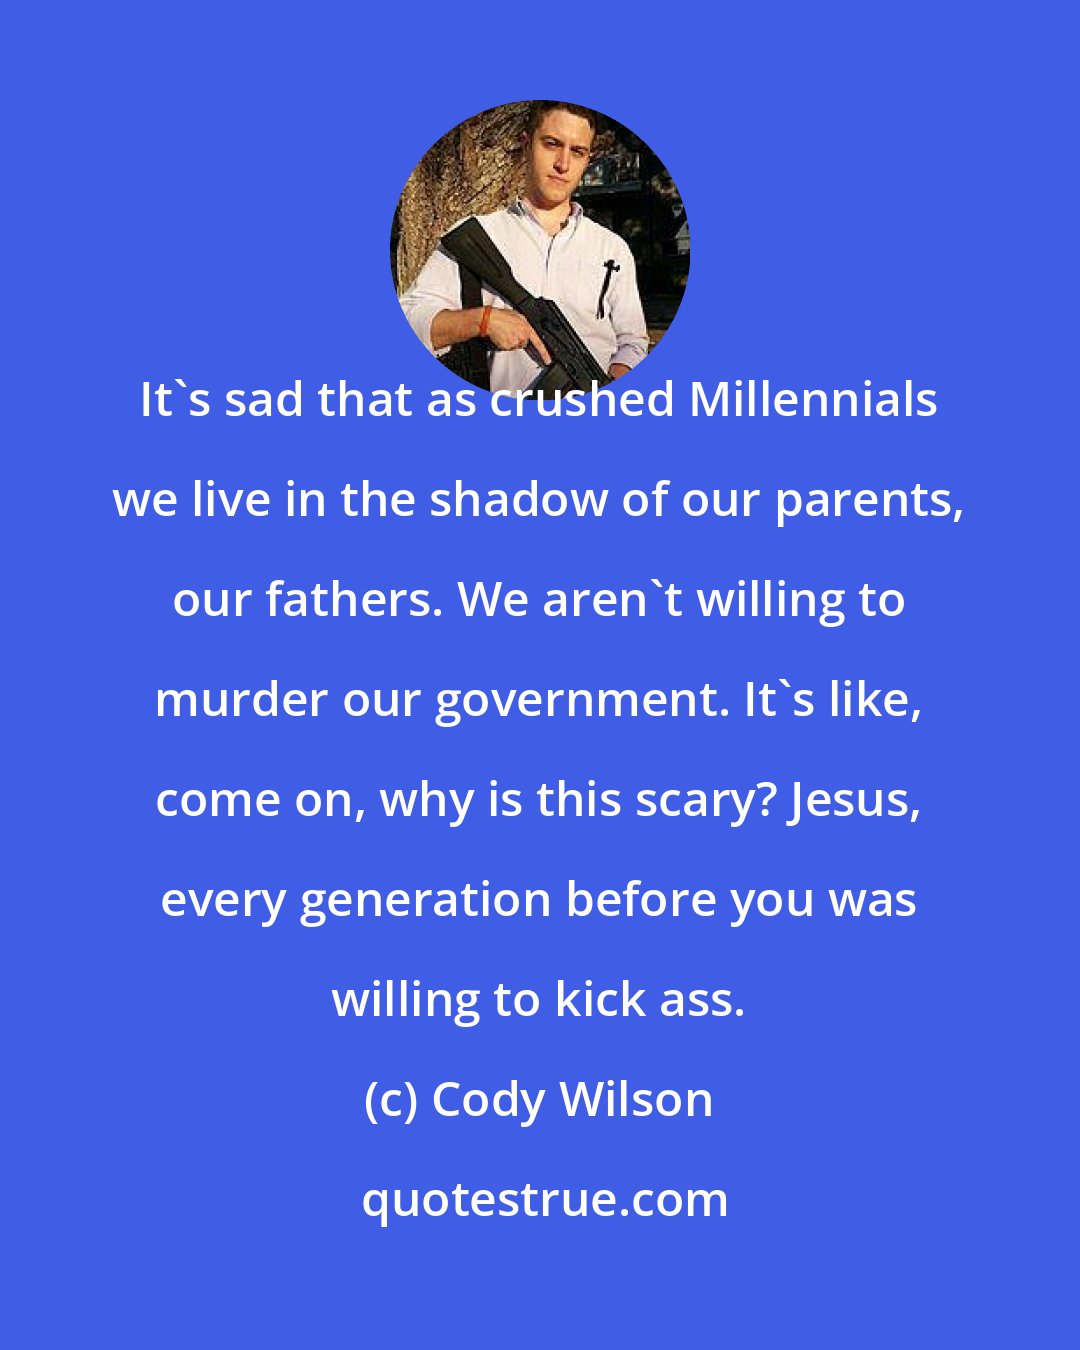 Cody Wilson: It's sad that as crushed Millennials we live in the shadow of our parents, our fathers. We aren't willing to murder our government. It's like, come on, why is this scary? Jesus, every generation before you was willing to kick ass.